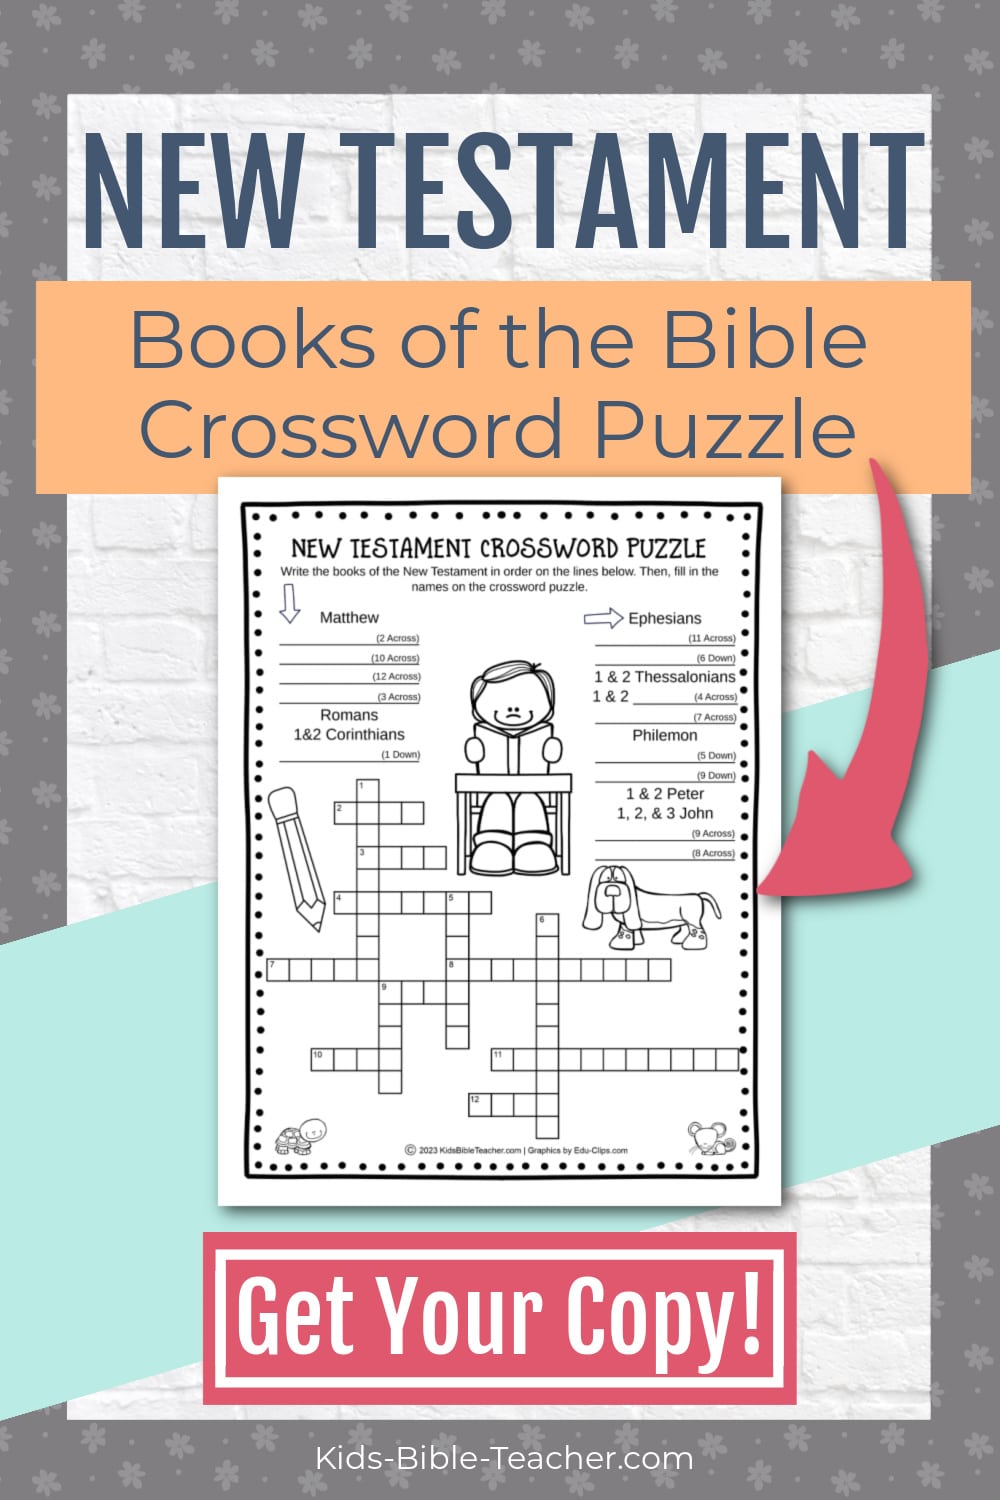 This free printable New Testament Books of the Bible crossword puzzle for kids will help your kids learn the books of the Bible in order!